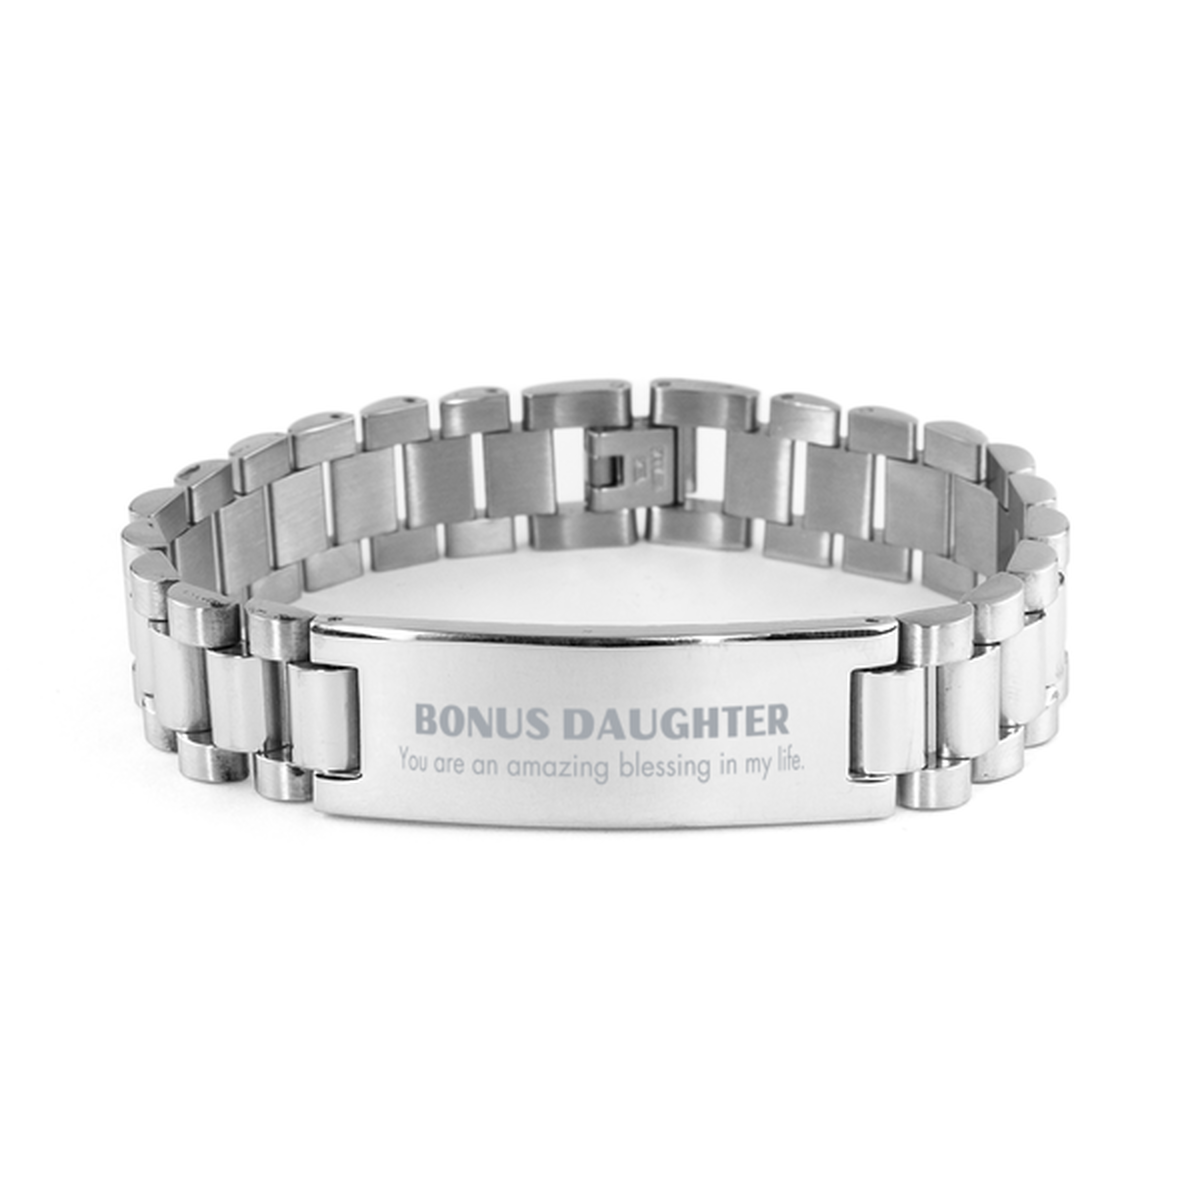 Bonus Daughter Ladder Stainless Steel Bracelet, You are an amazing blessing in my life, Thank You Gifts For Bonus Daughter, Inspirational Birthday Christmas Unique Gifts For Bonus Daughter